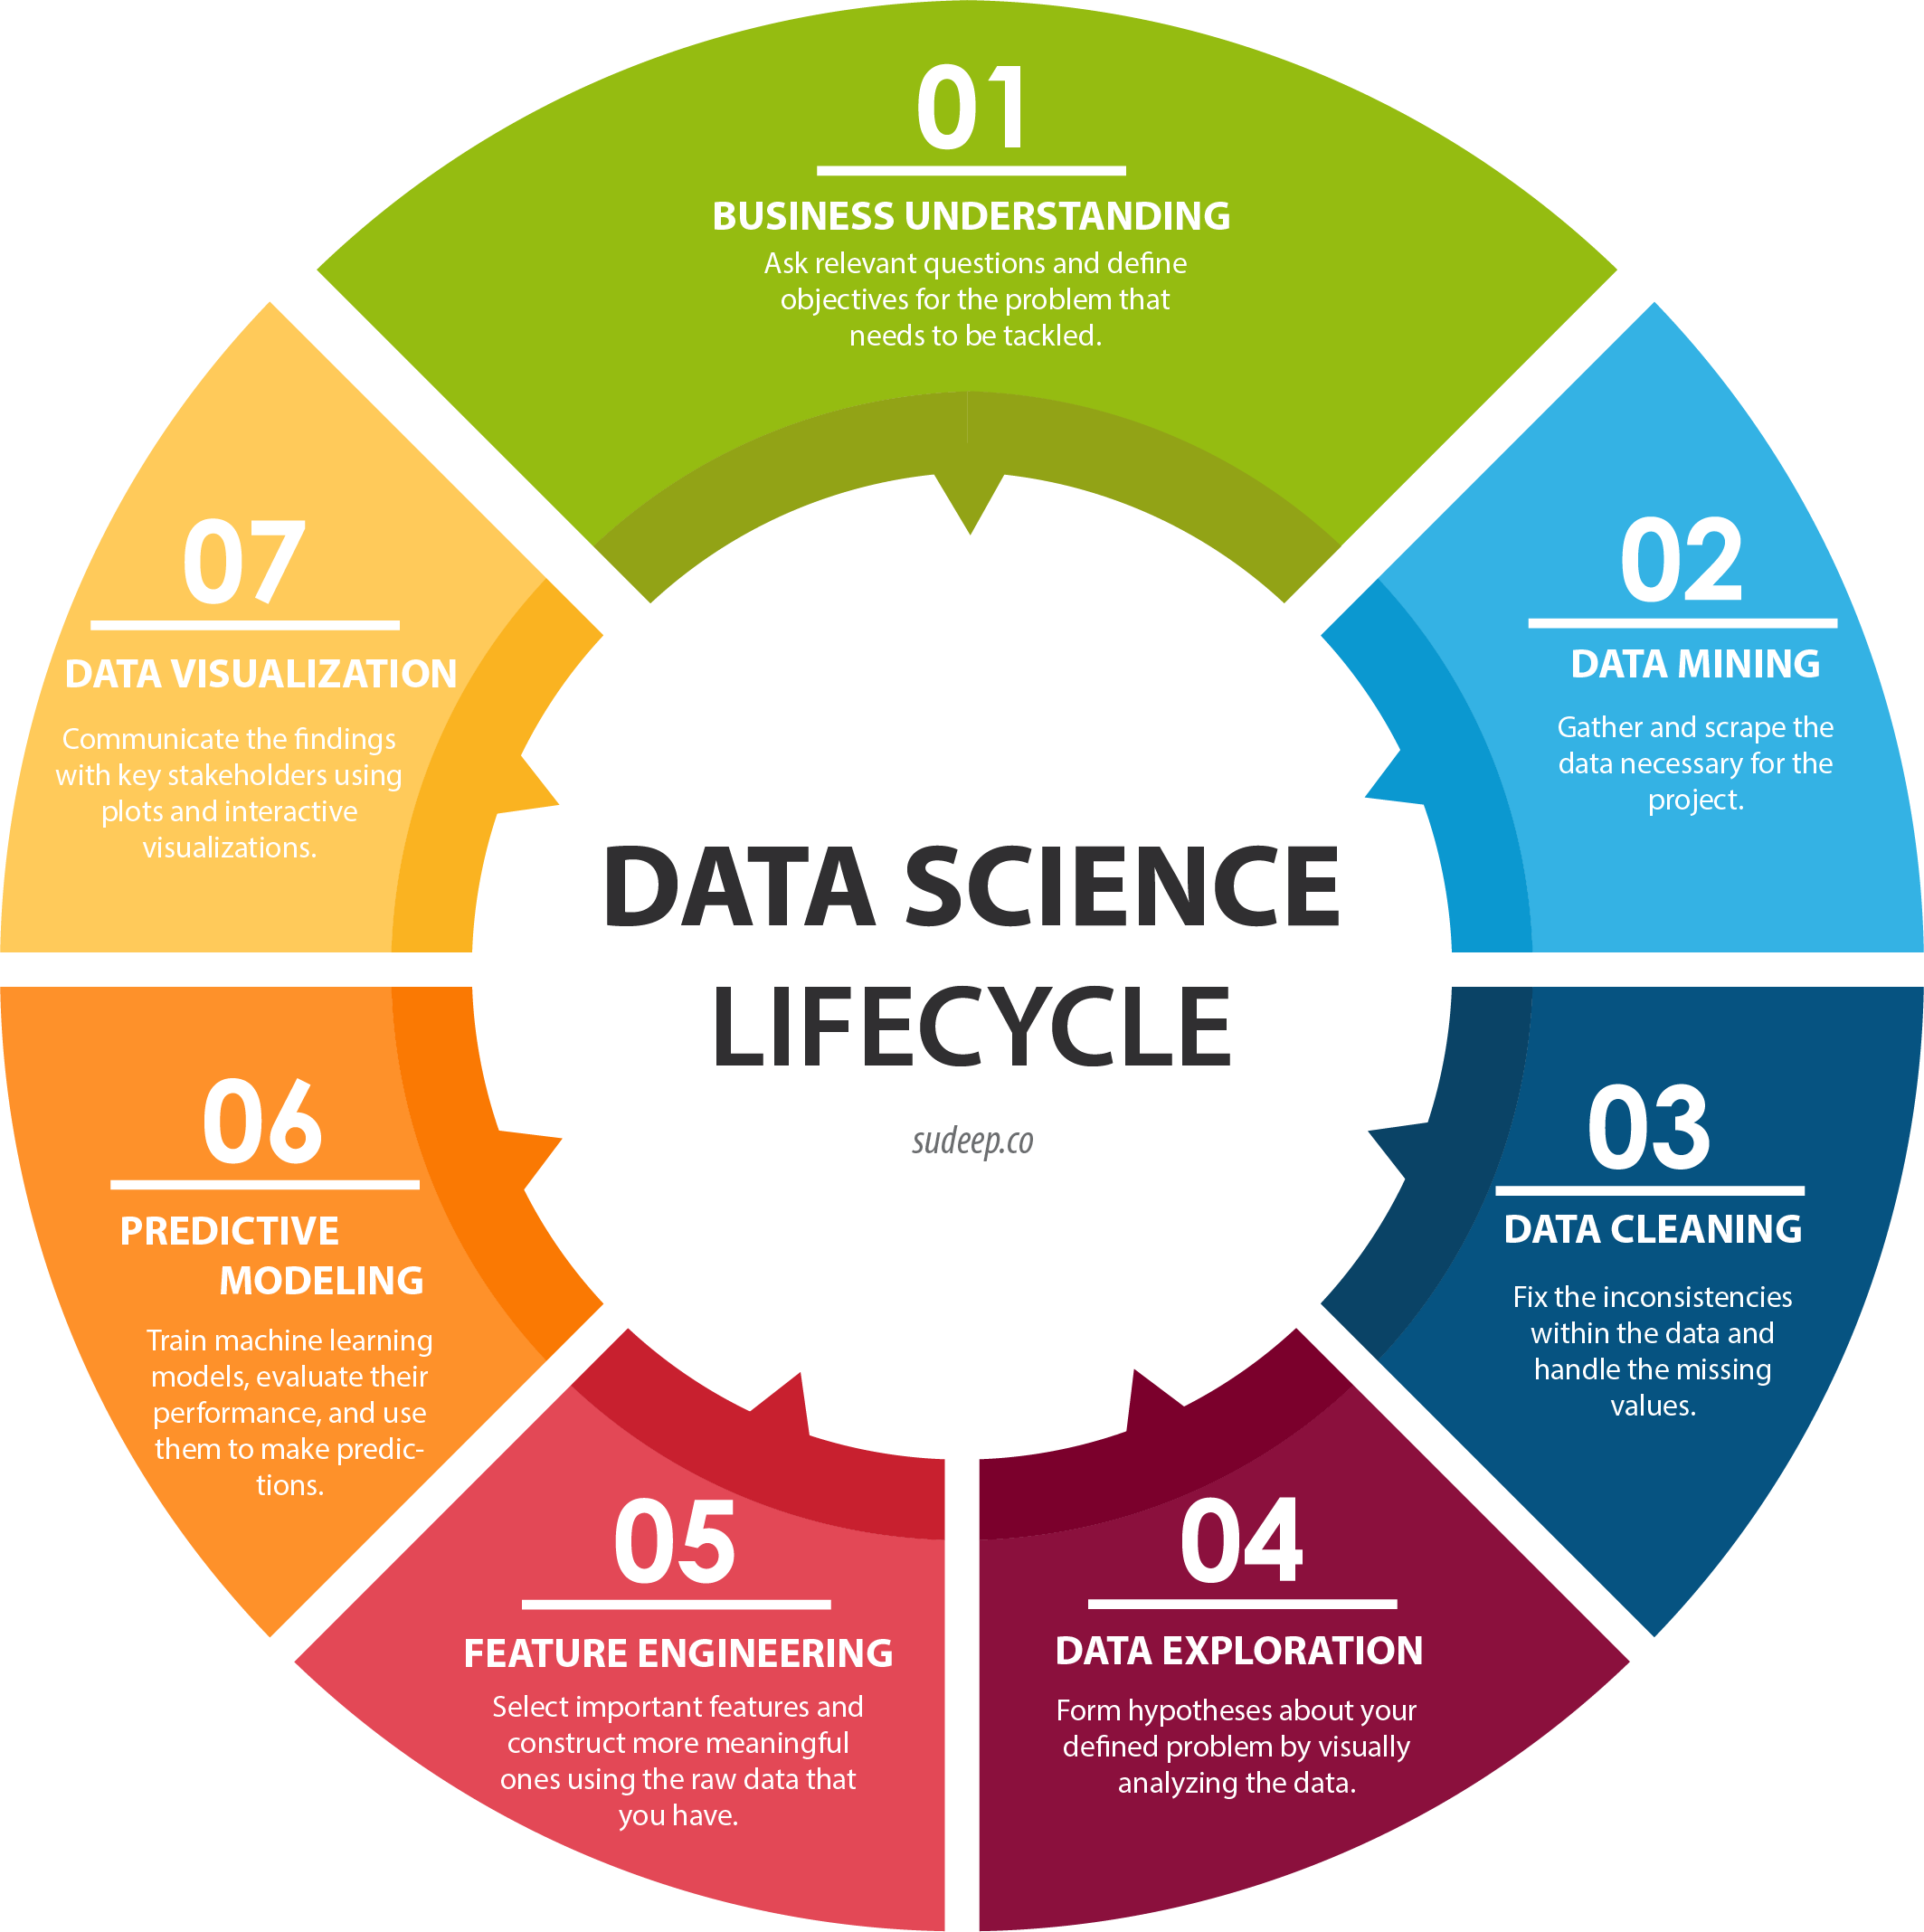 Understanding the Data Science Lifecycle